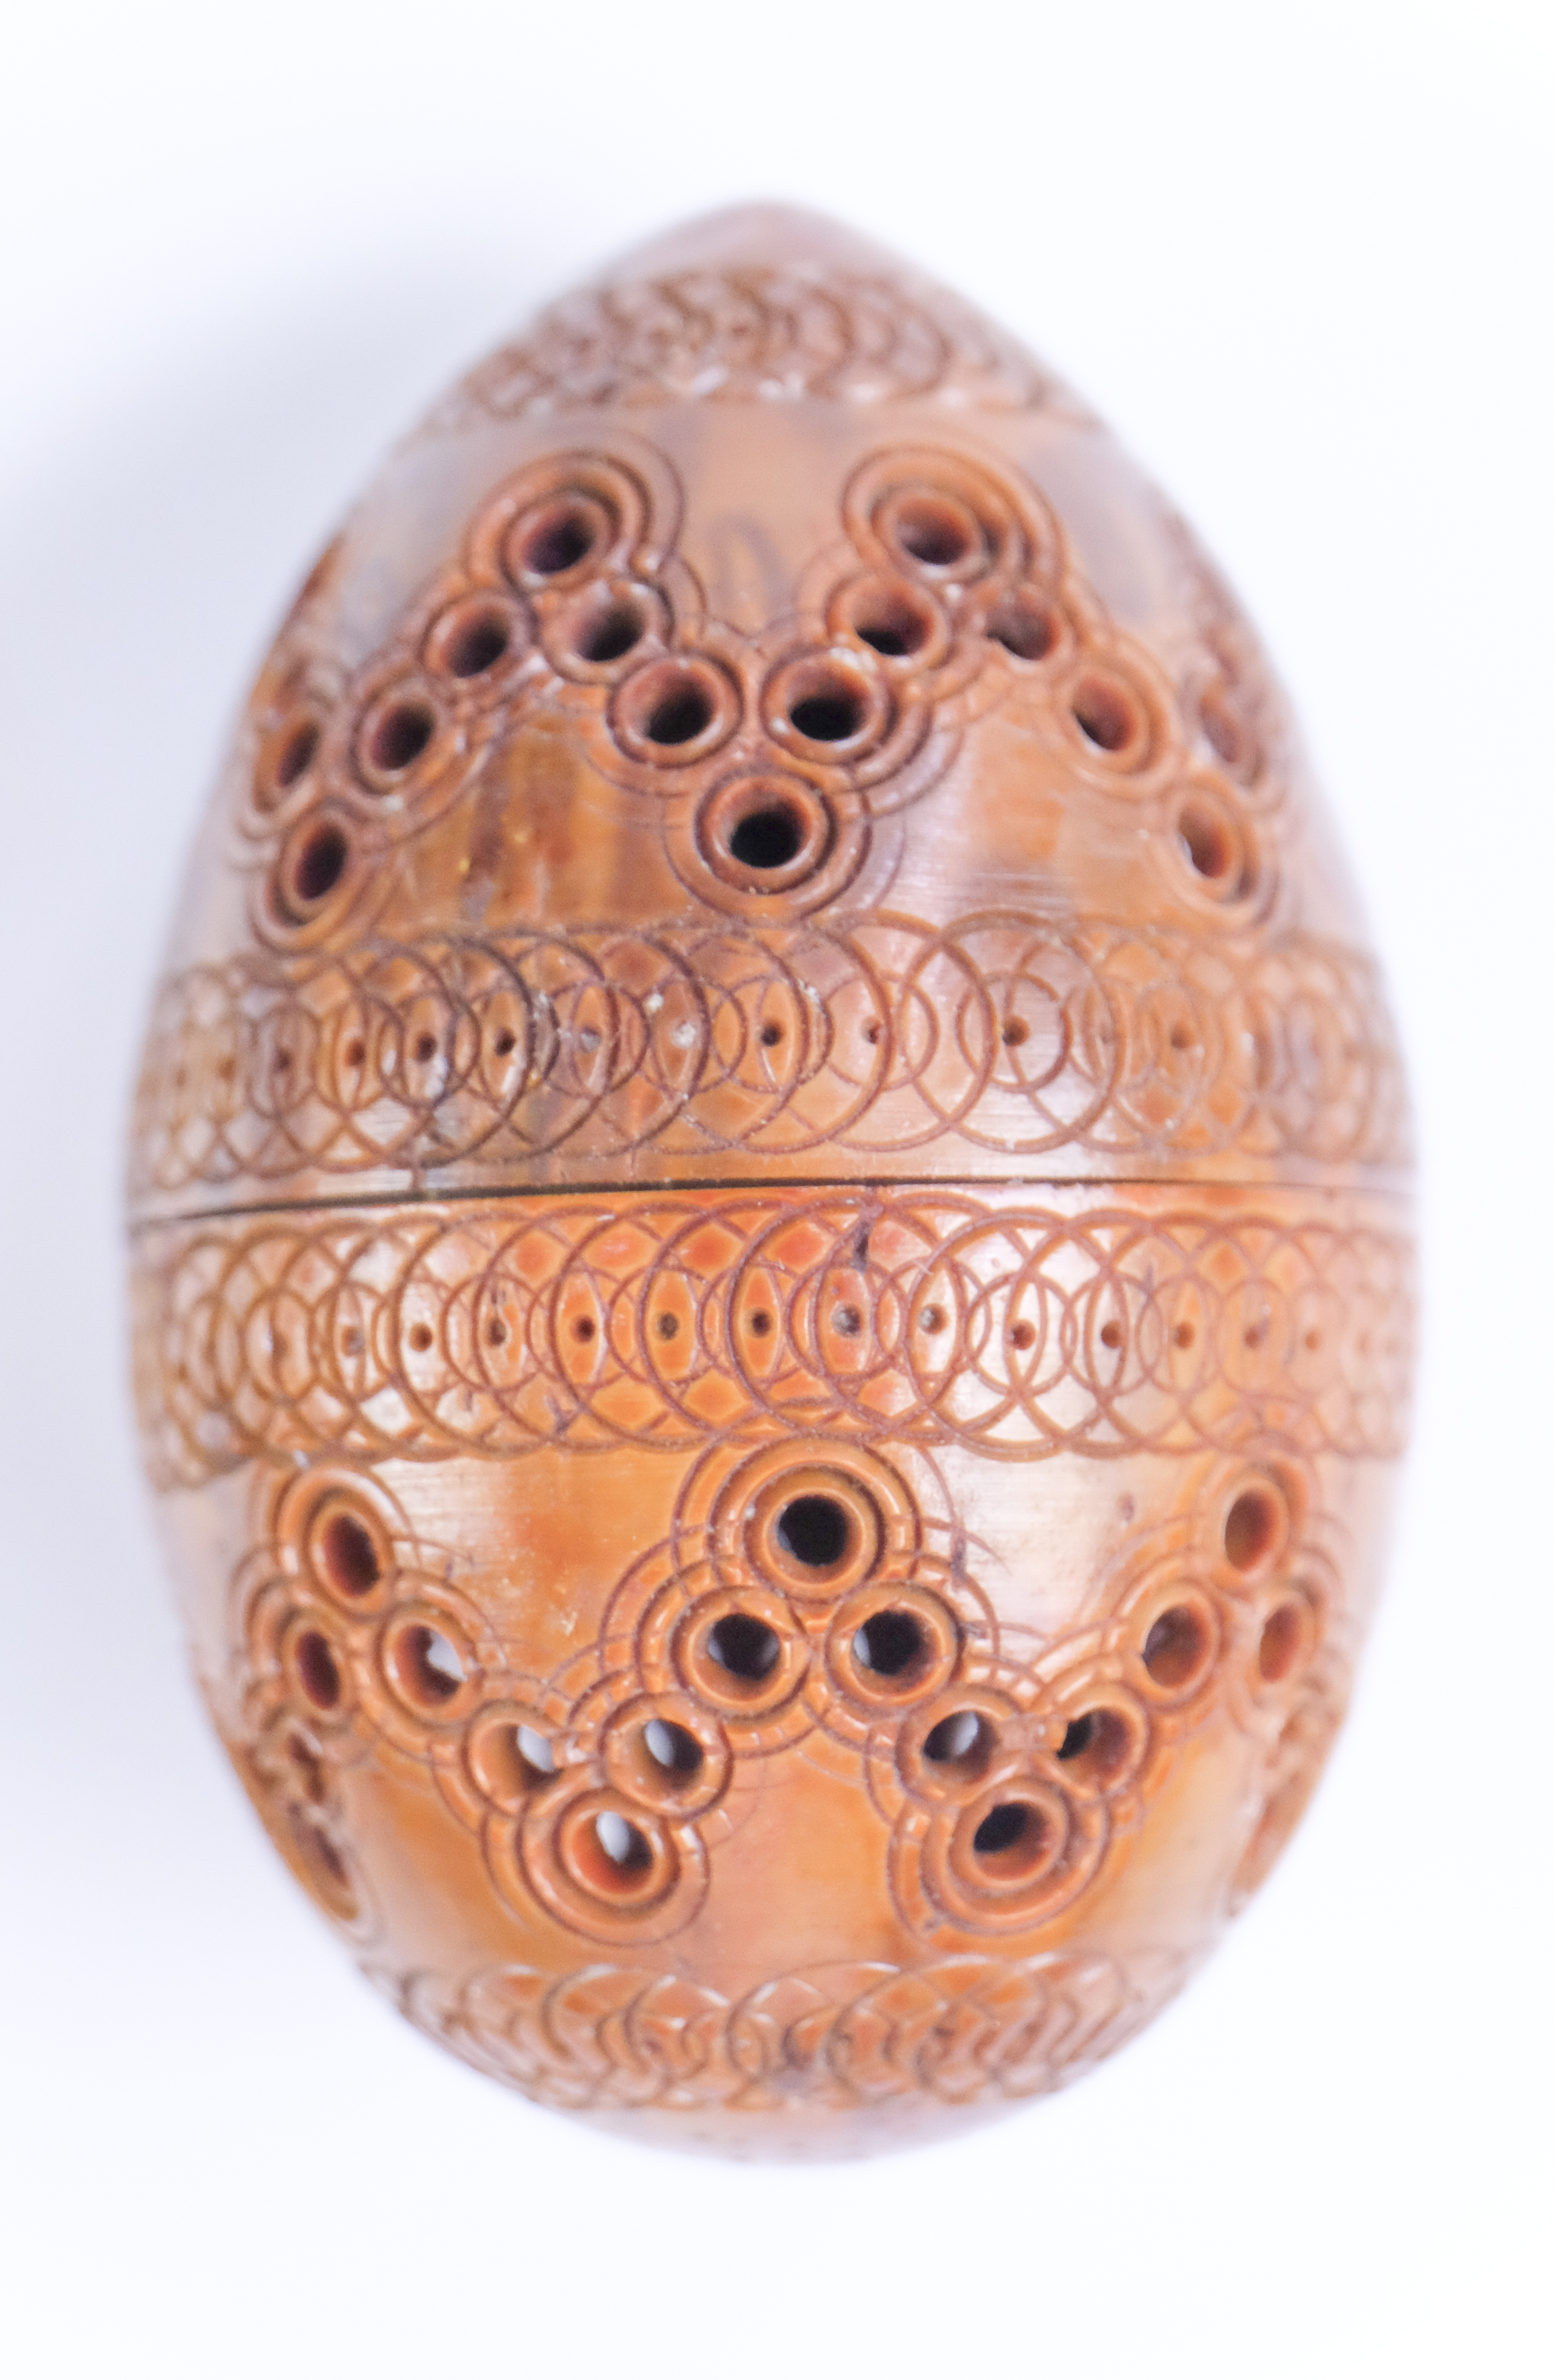 A late 18th / early 19th Century turned and pierced coquilla nut pocket pomander, 4 x 6 cm